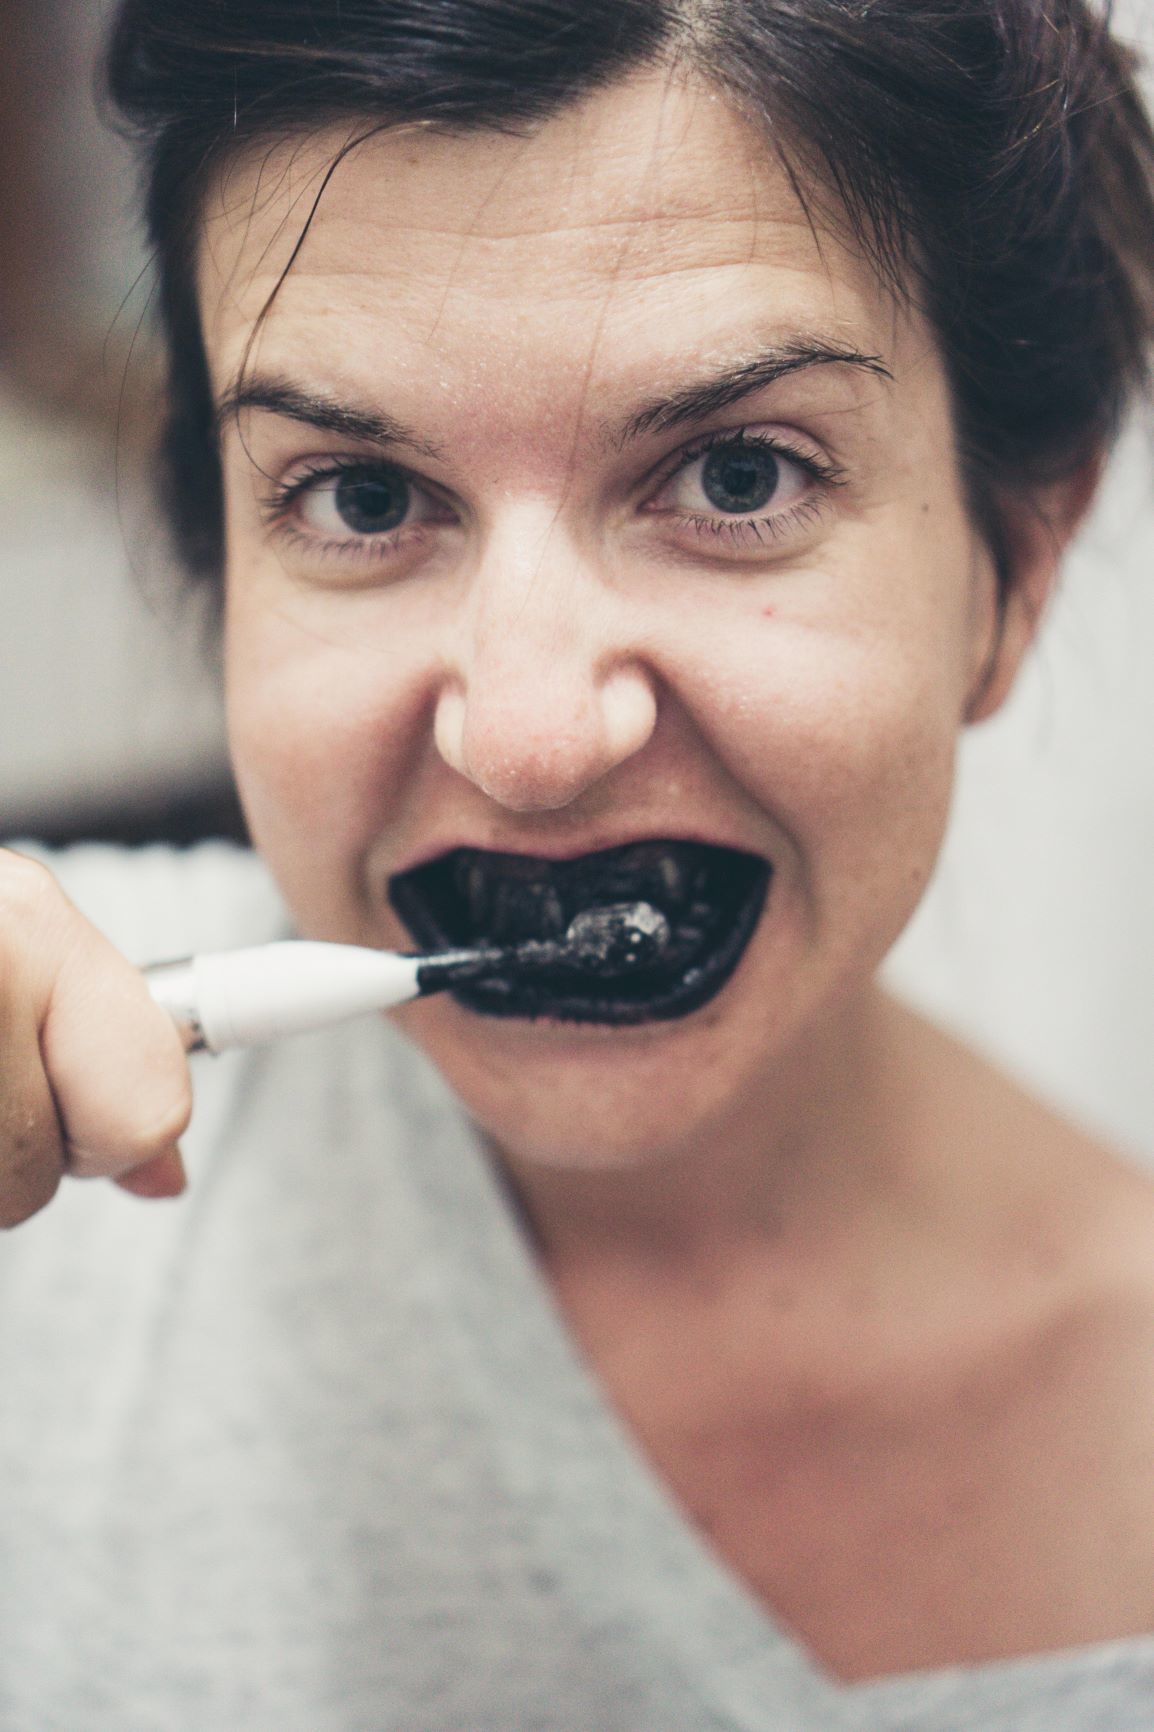 Is Charcoal Teeth Whitening Safe?